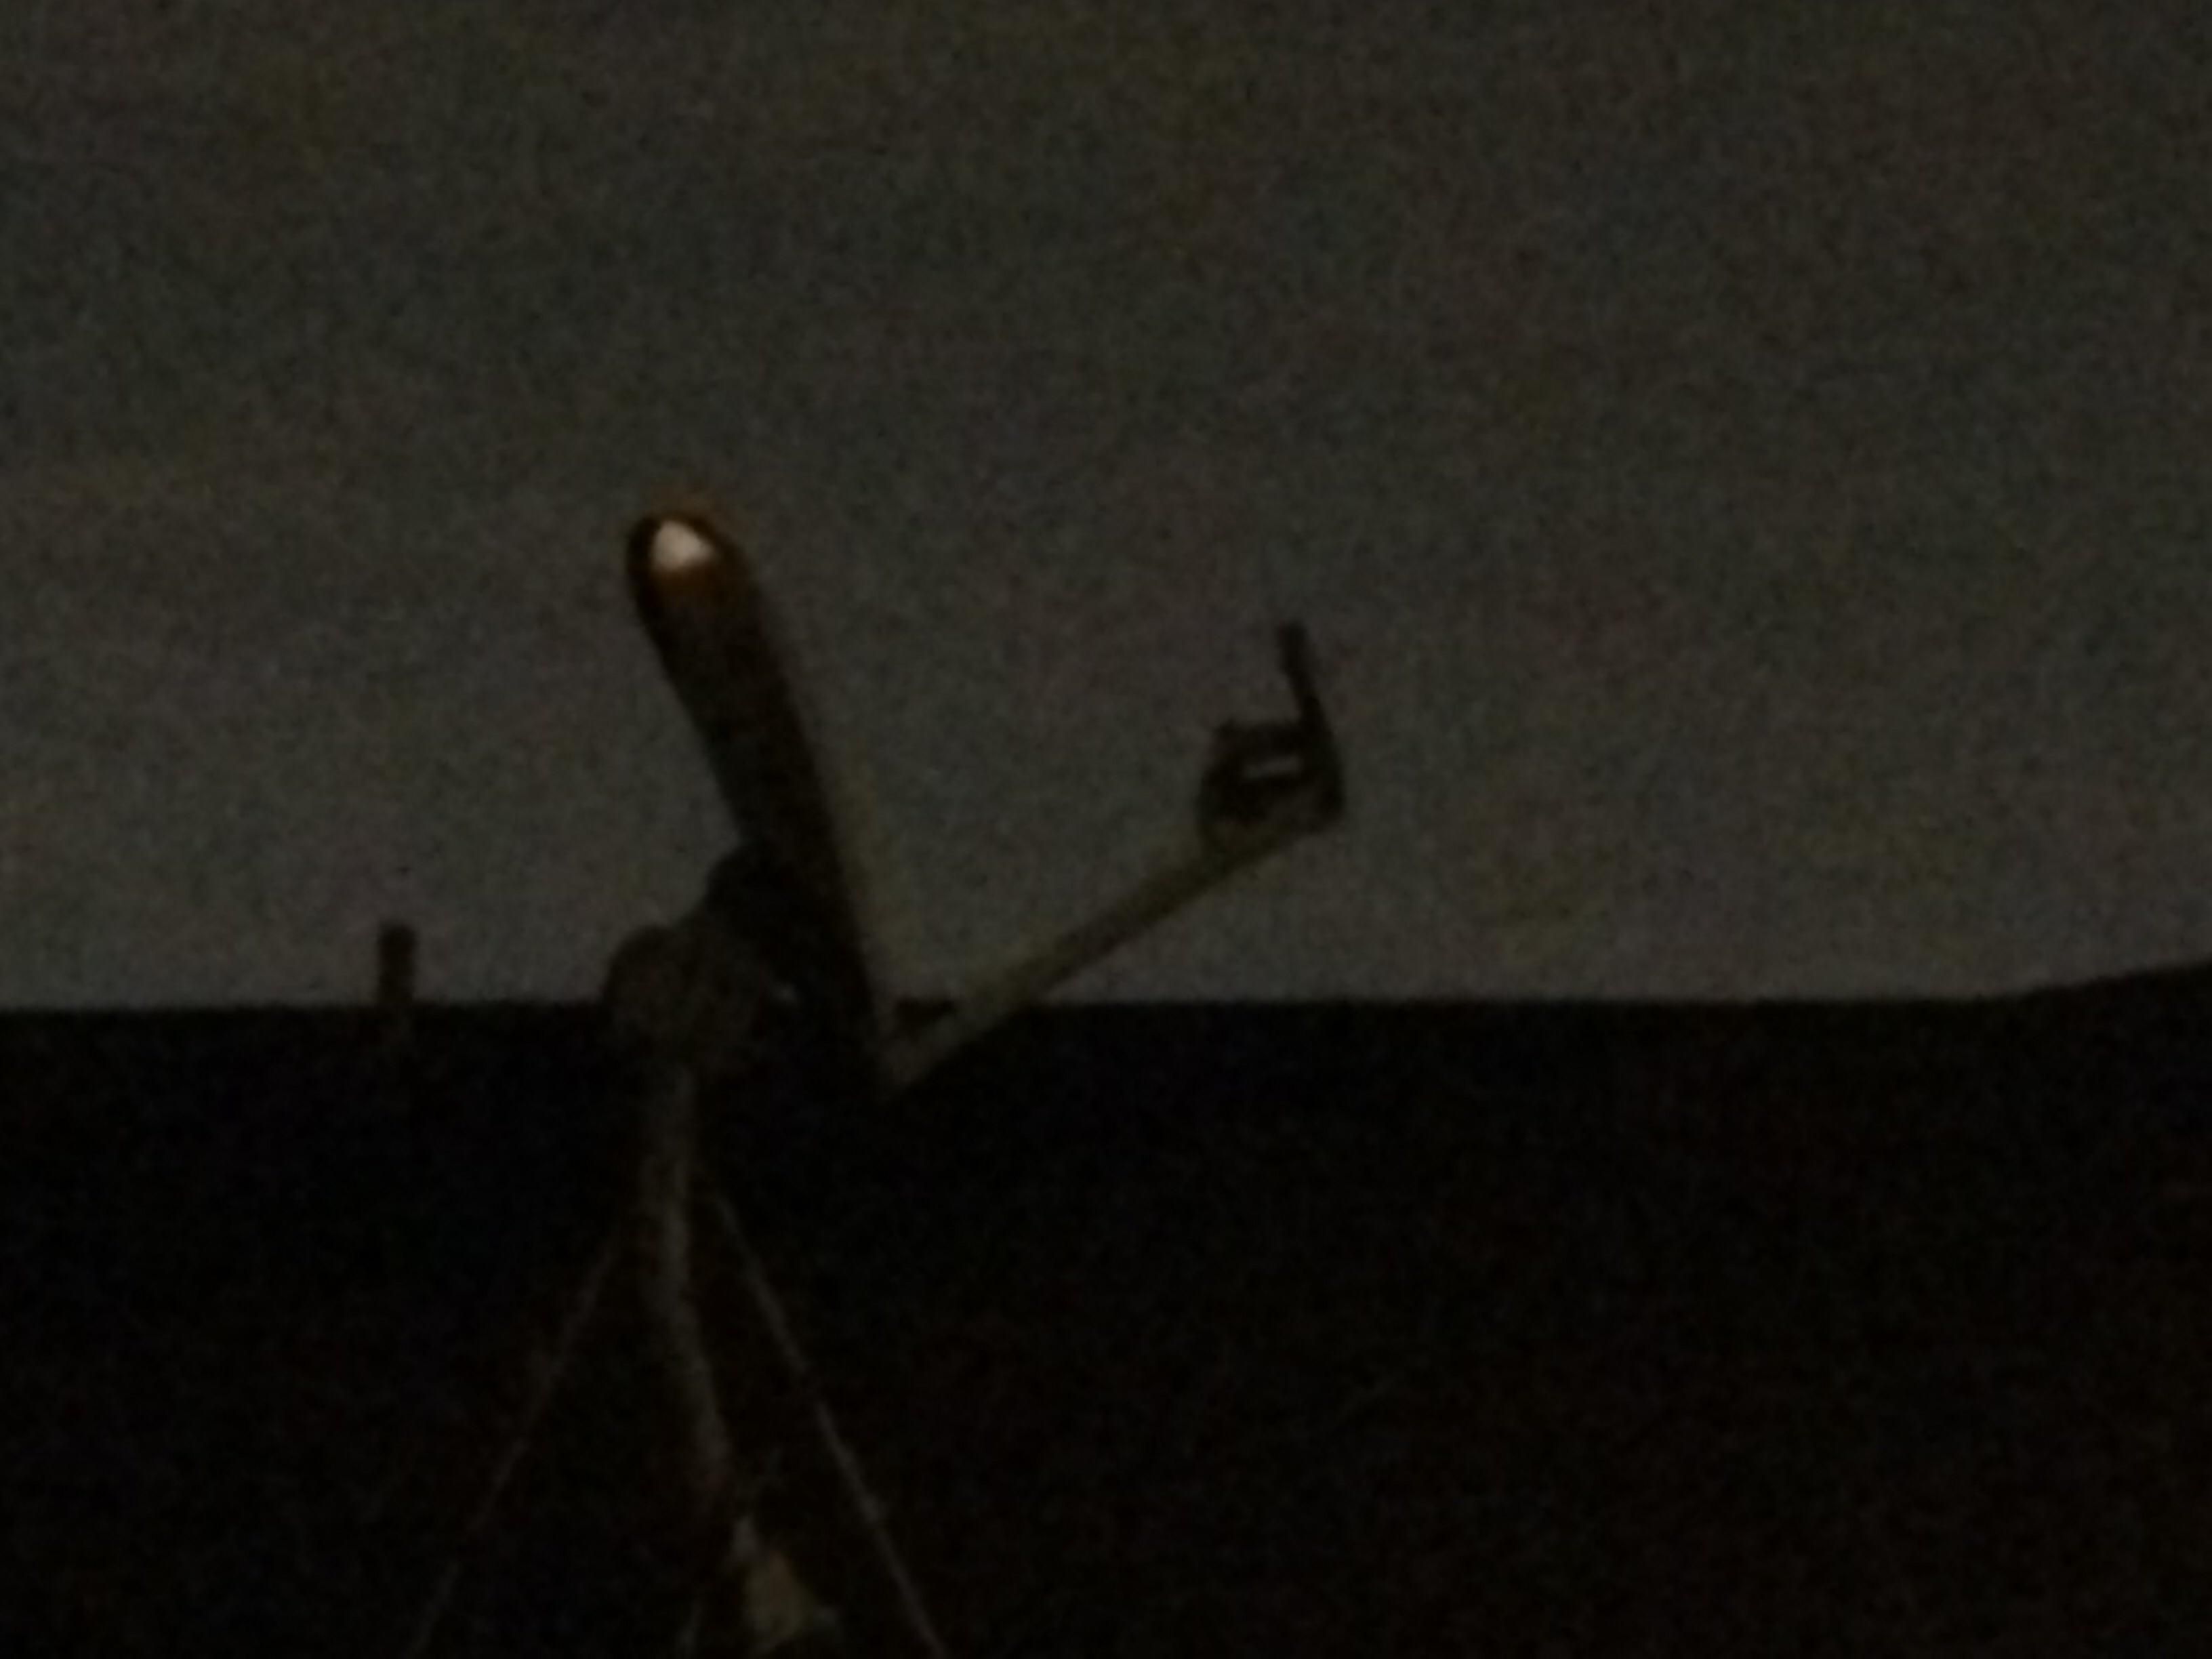 My neighbor's satellite dish looks like it's giving someone the finger.